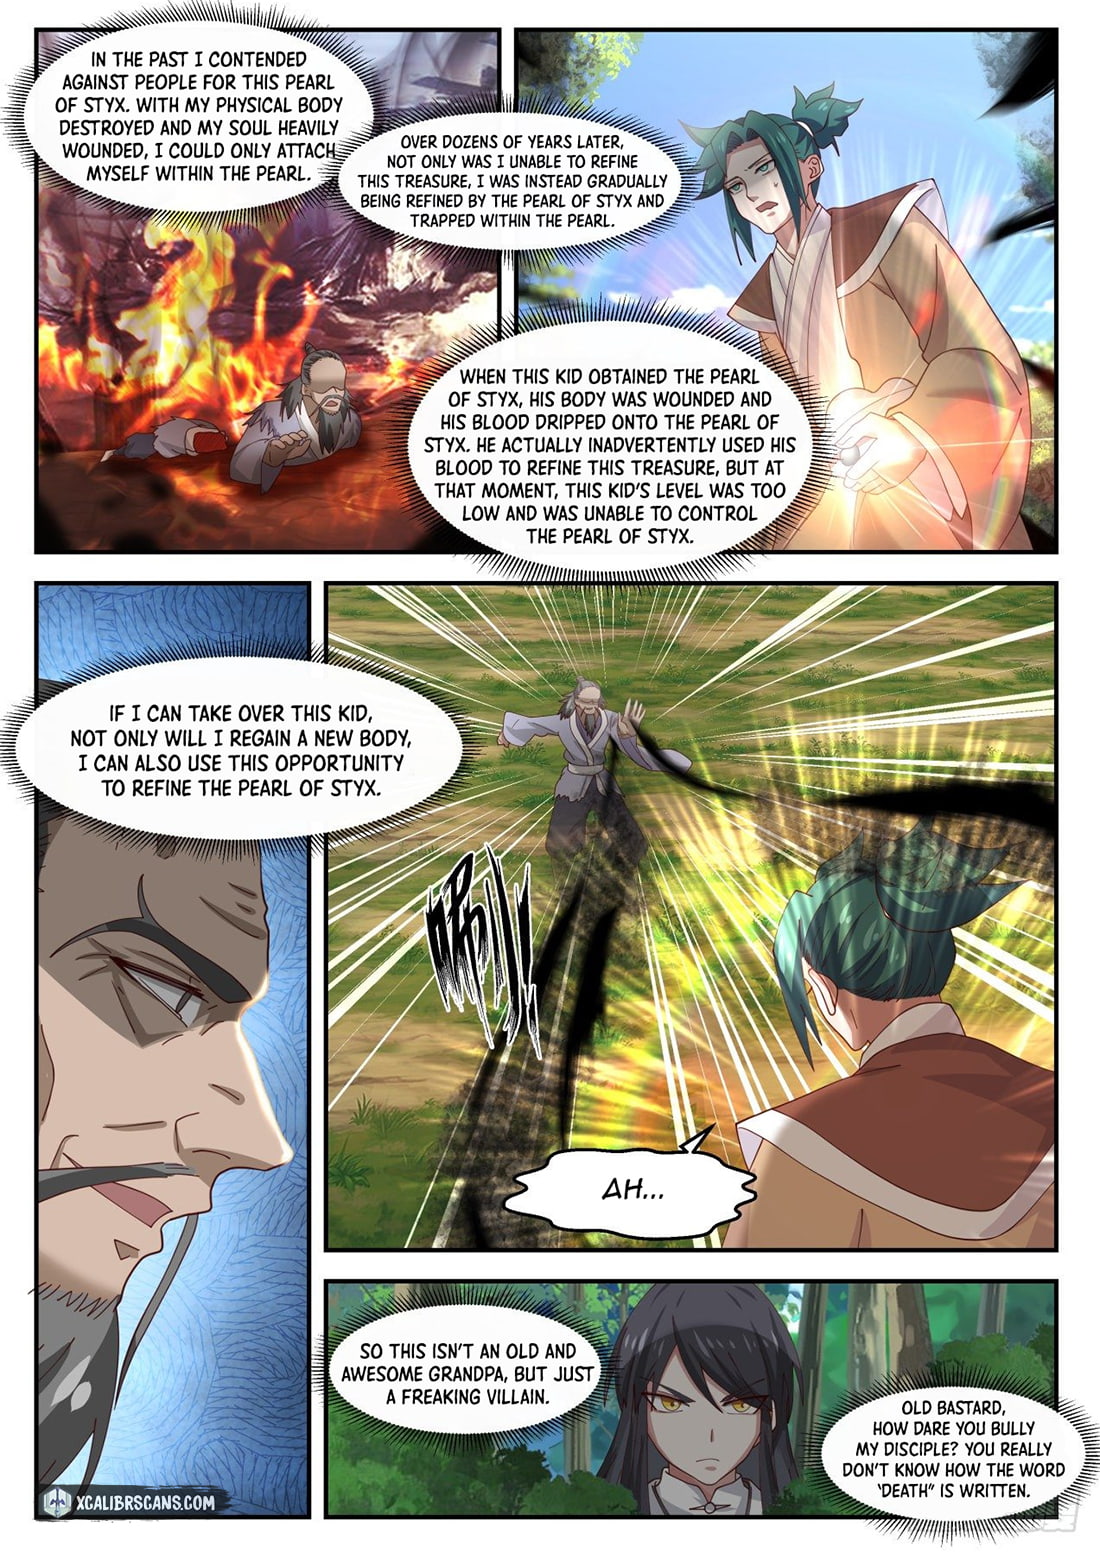 History's Number 1 Founder chapter 44 page 6